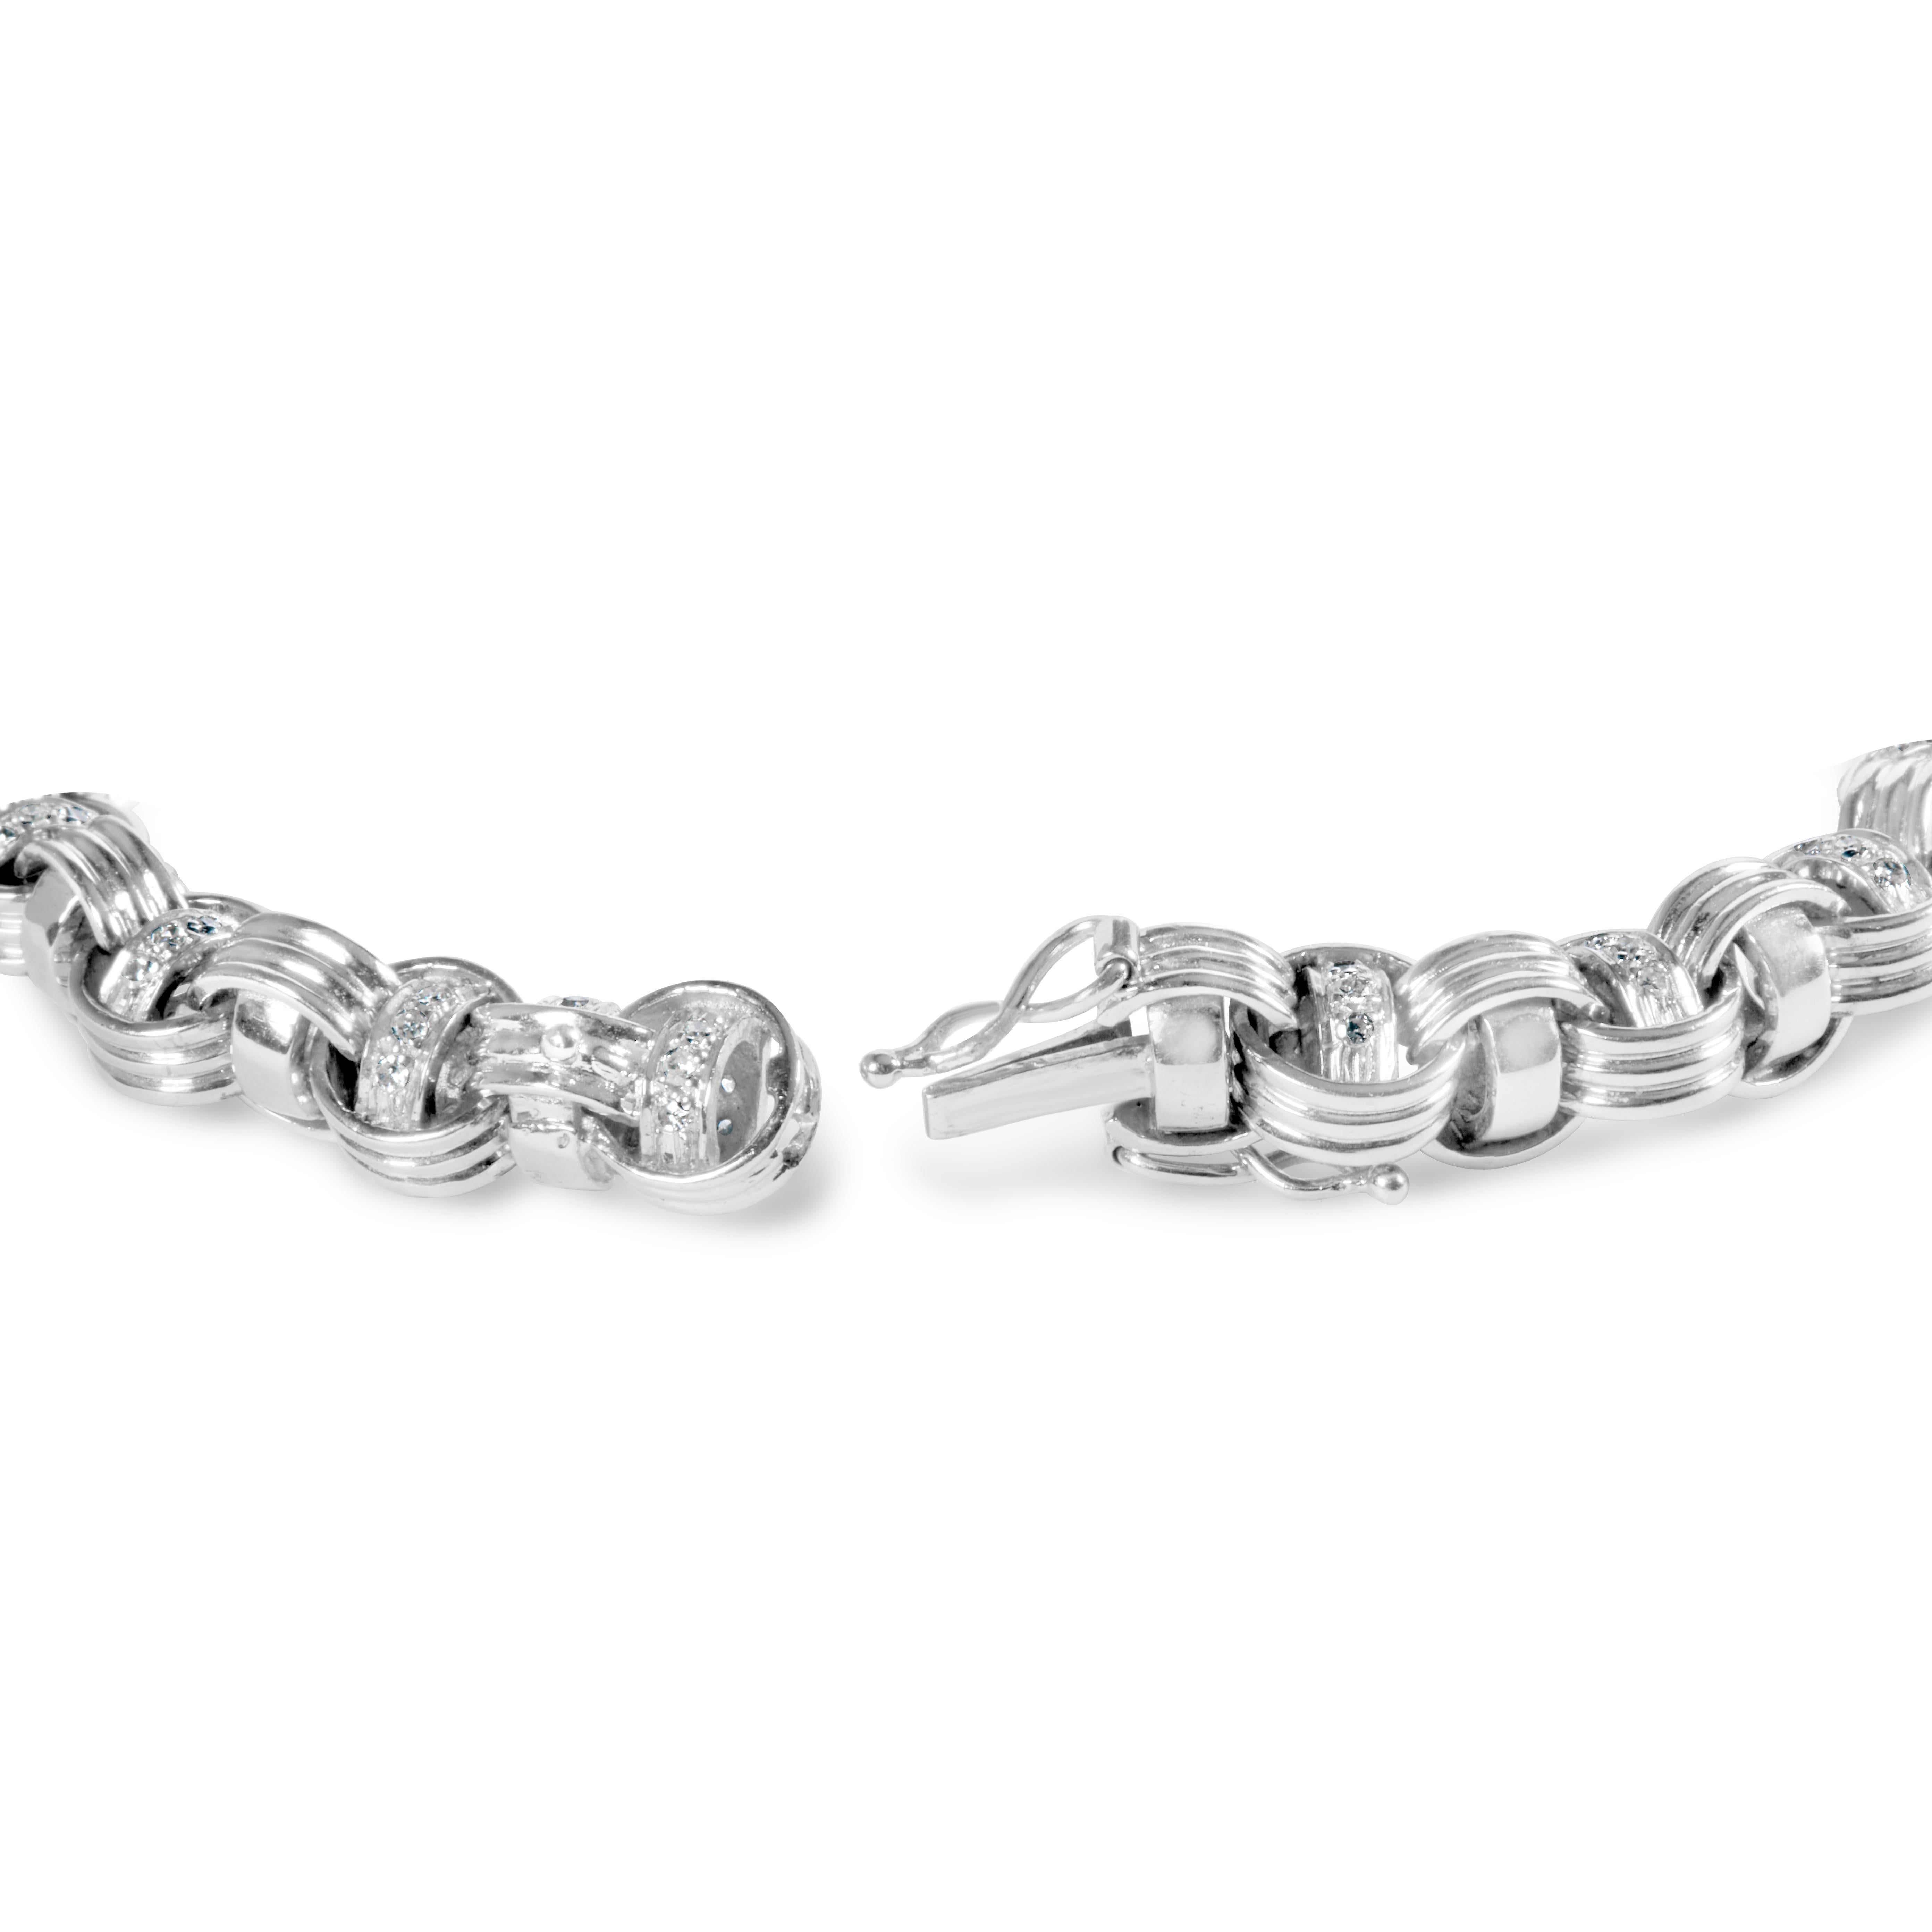 Indulge in the ultimate luxury with this stunning diamond Byzantine link bracelet. Crafted from lustrous 14K white gold, this bracelet features a knotted design that adds a touch of sophistication to any outfit. With 153 natural round diamonds